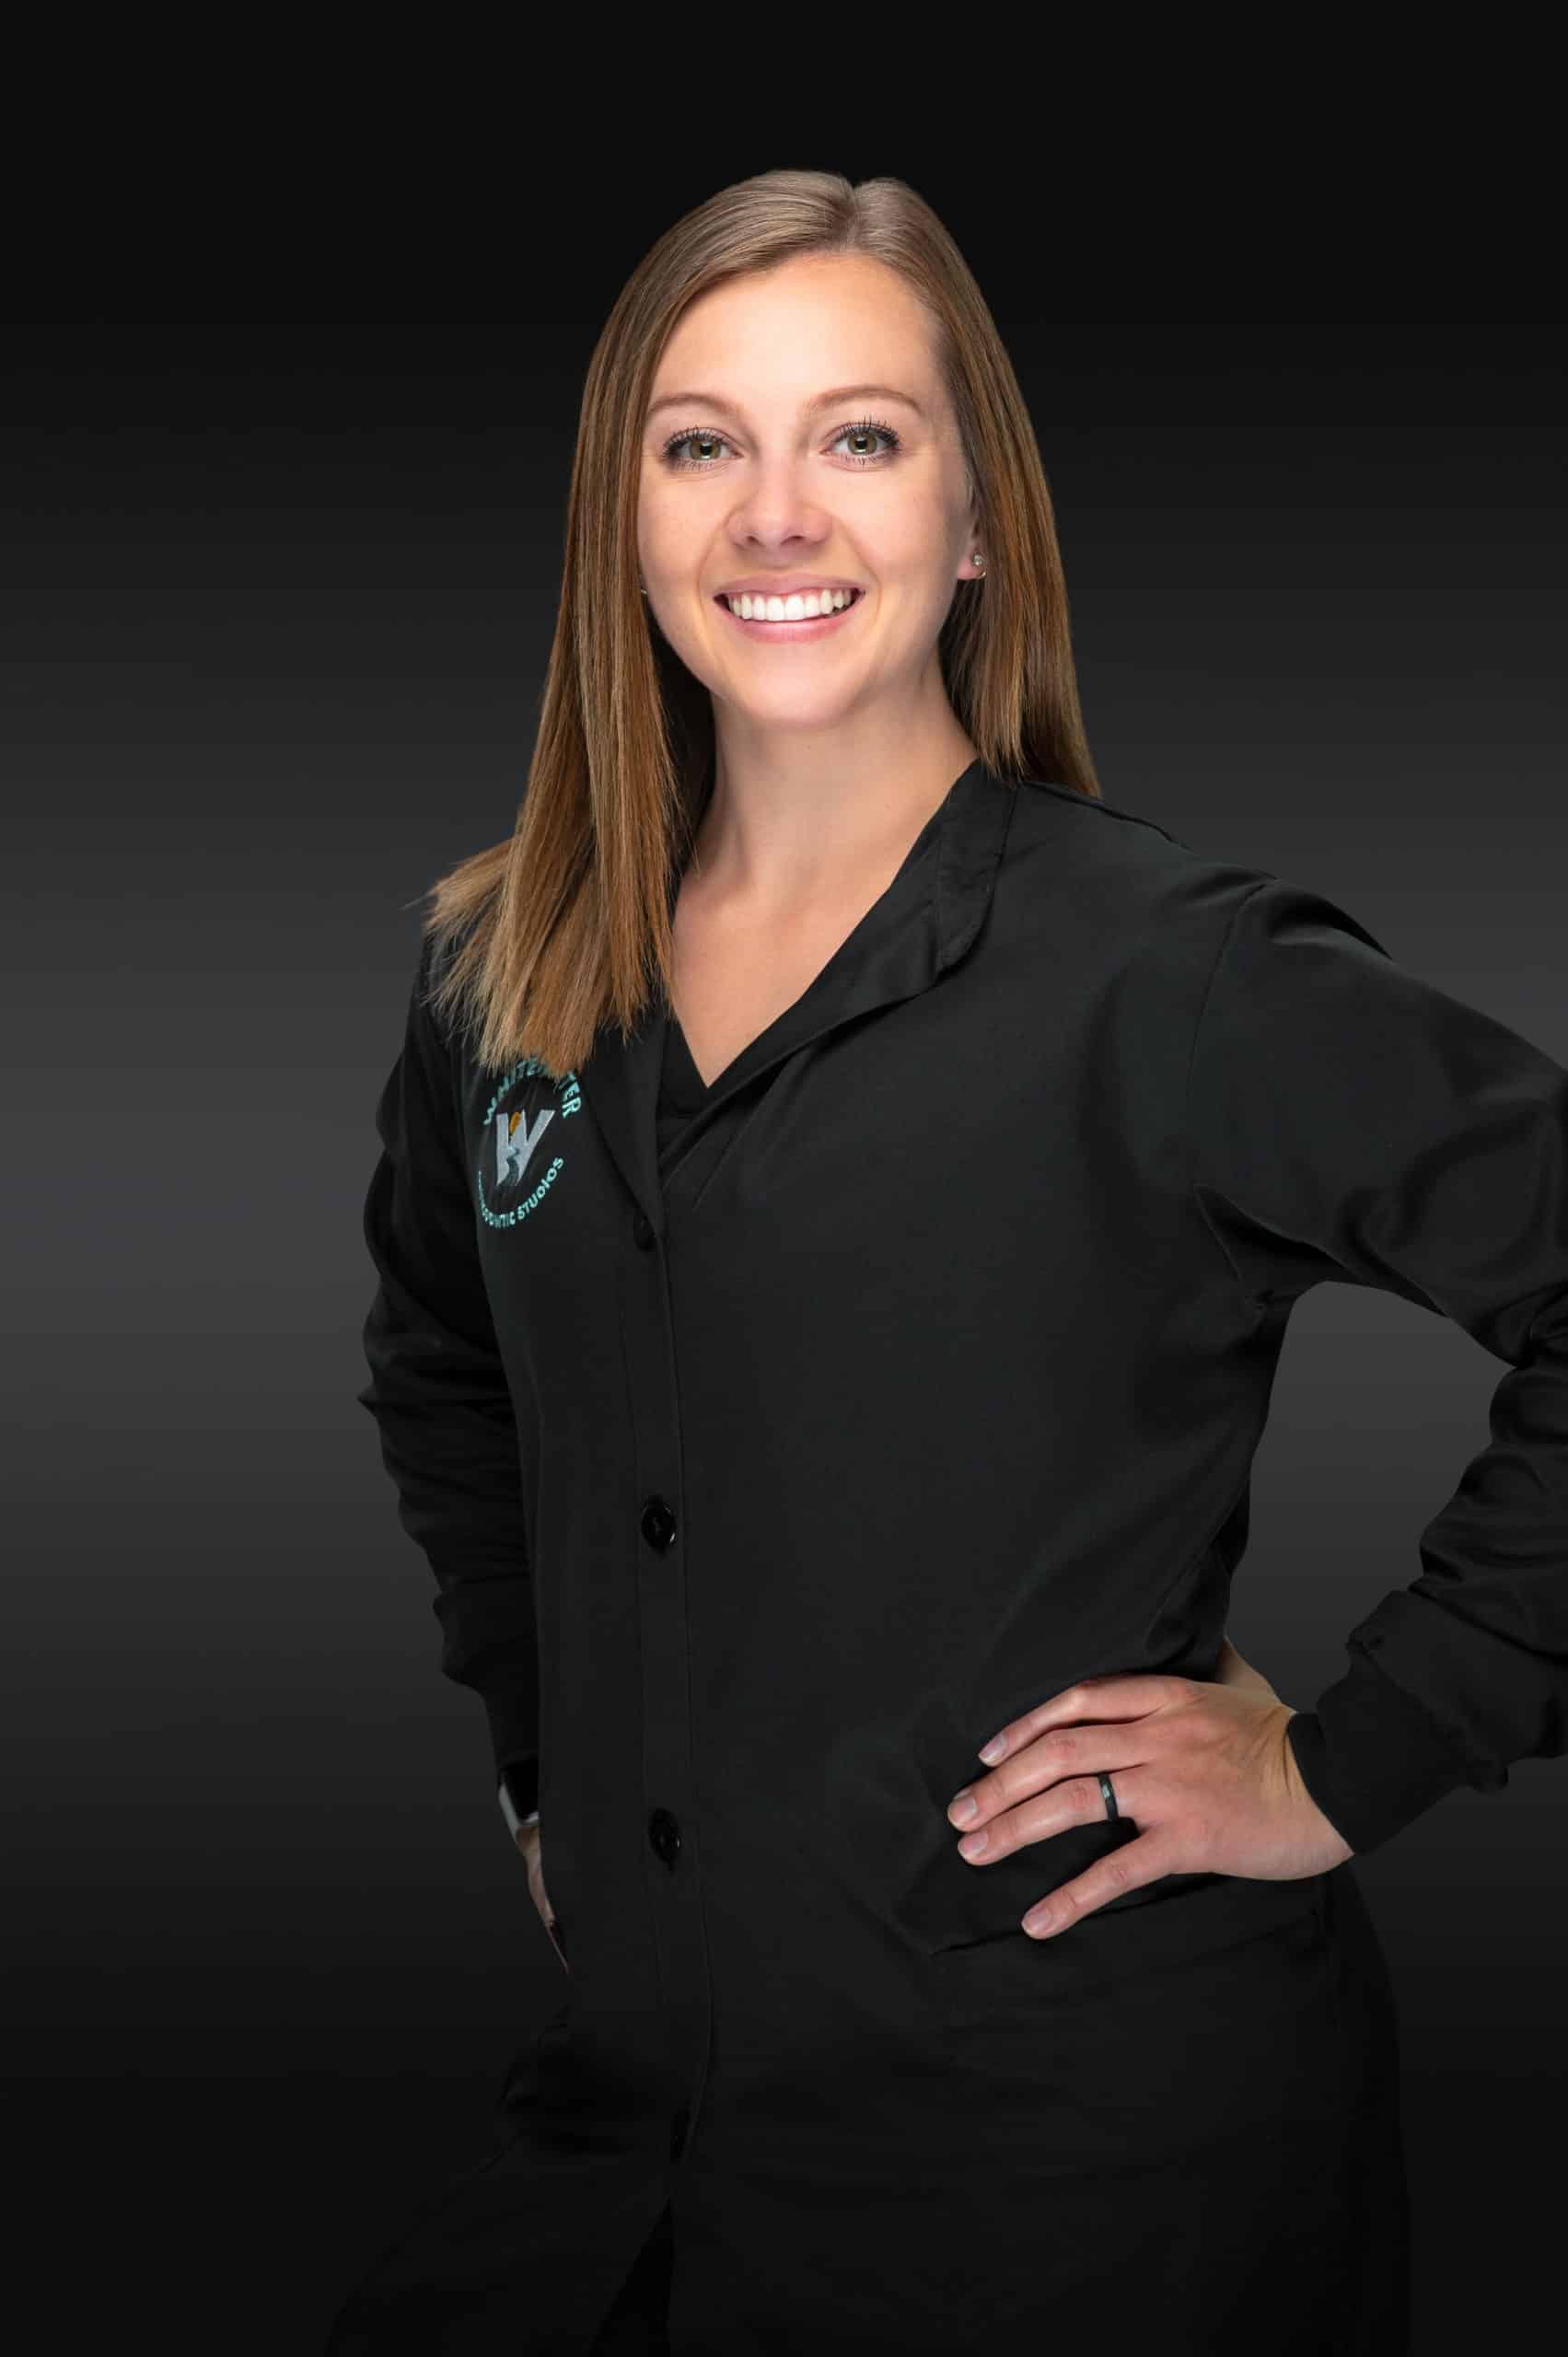 Staff Whitewater Orthodontic Studios in Yelm and Tacoma, WA